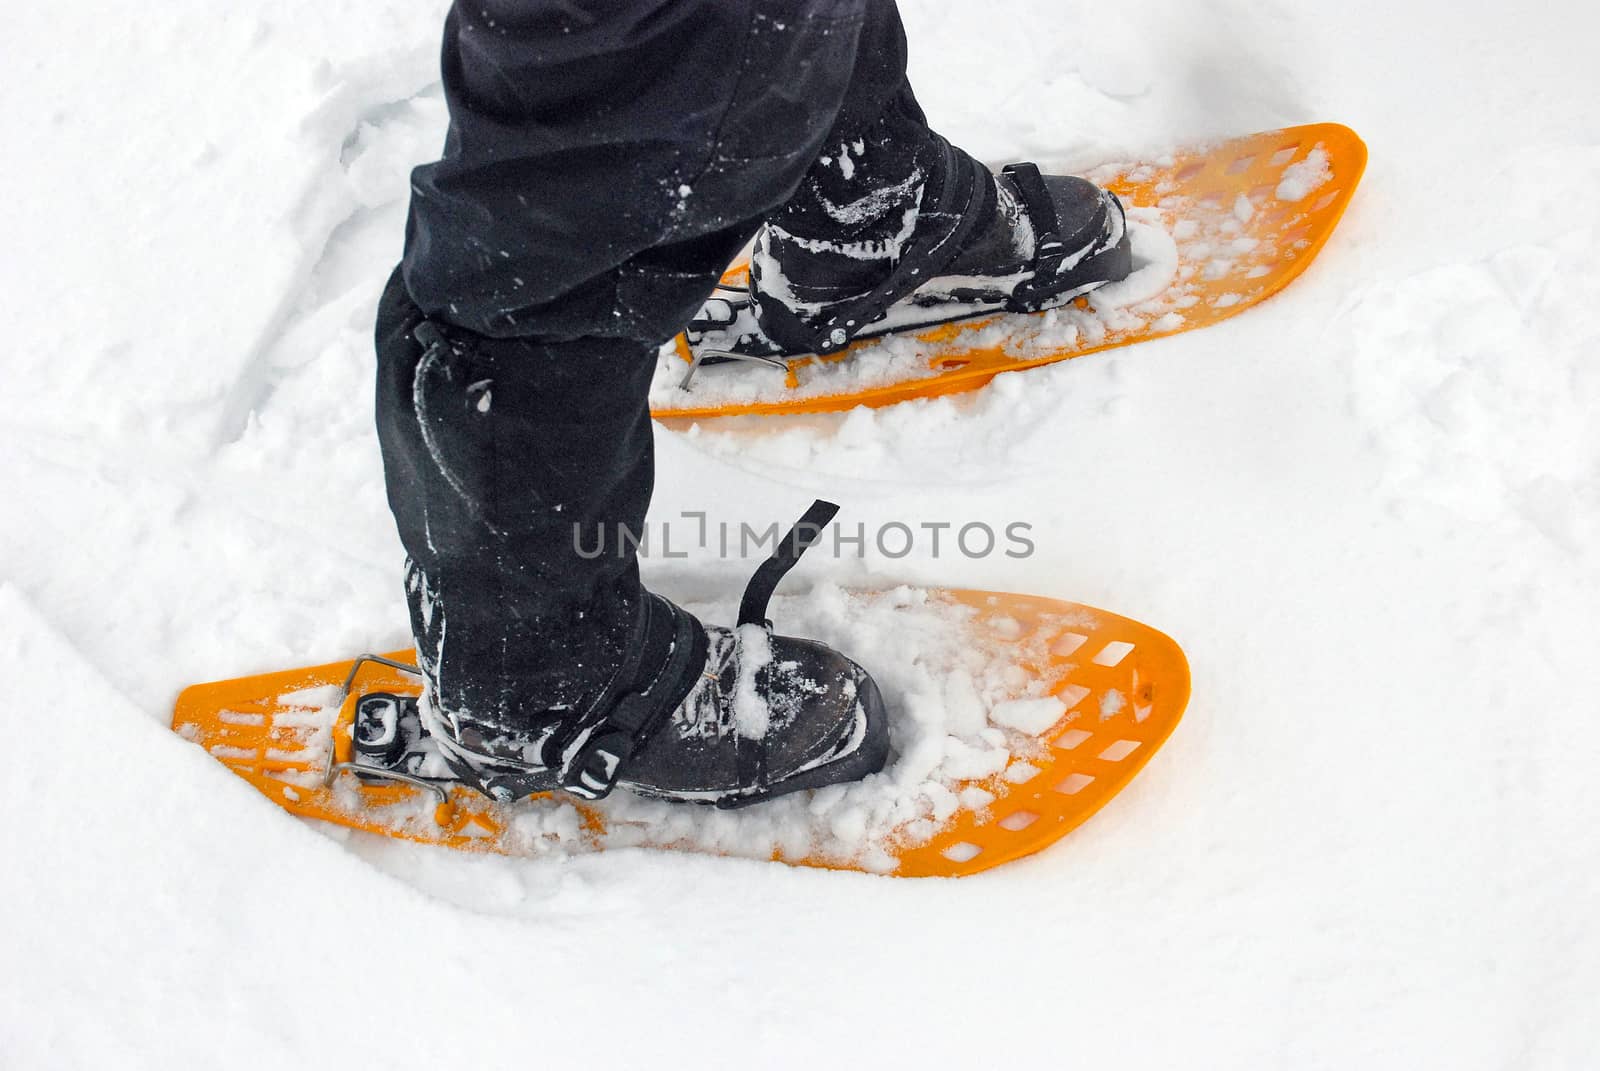 Two yellow snowshoes in the snow